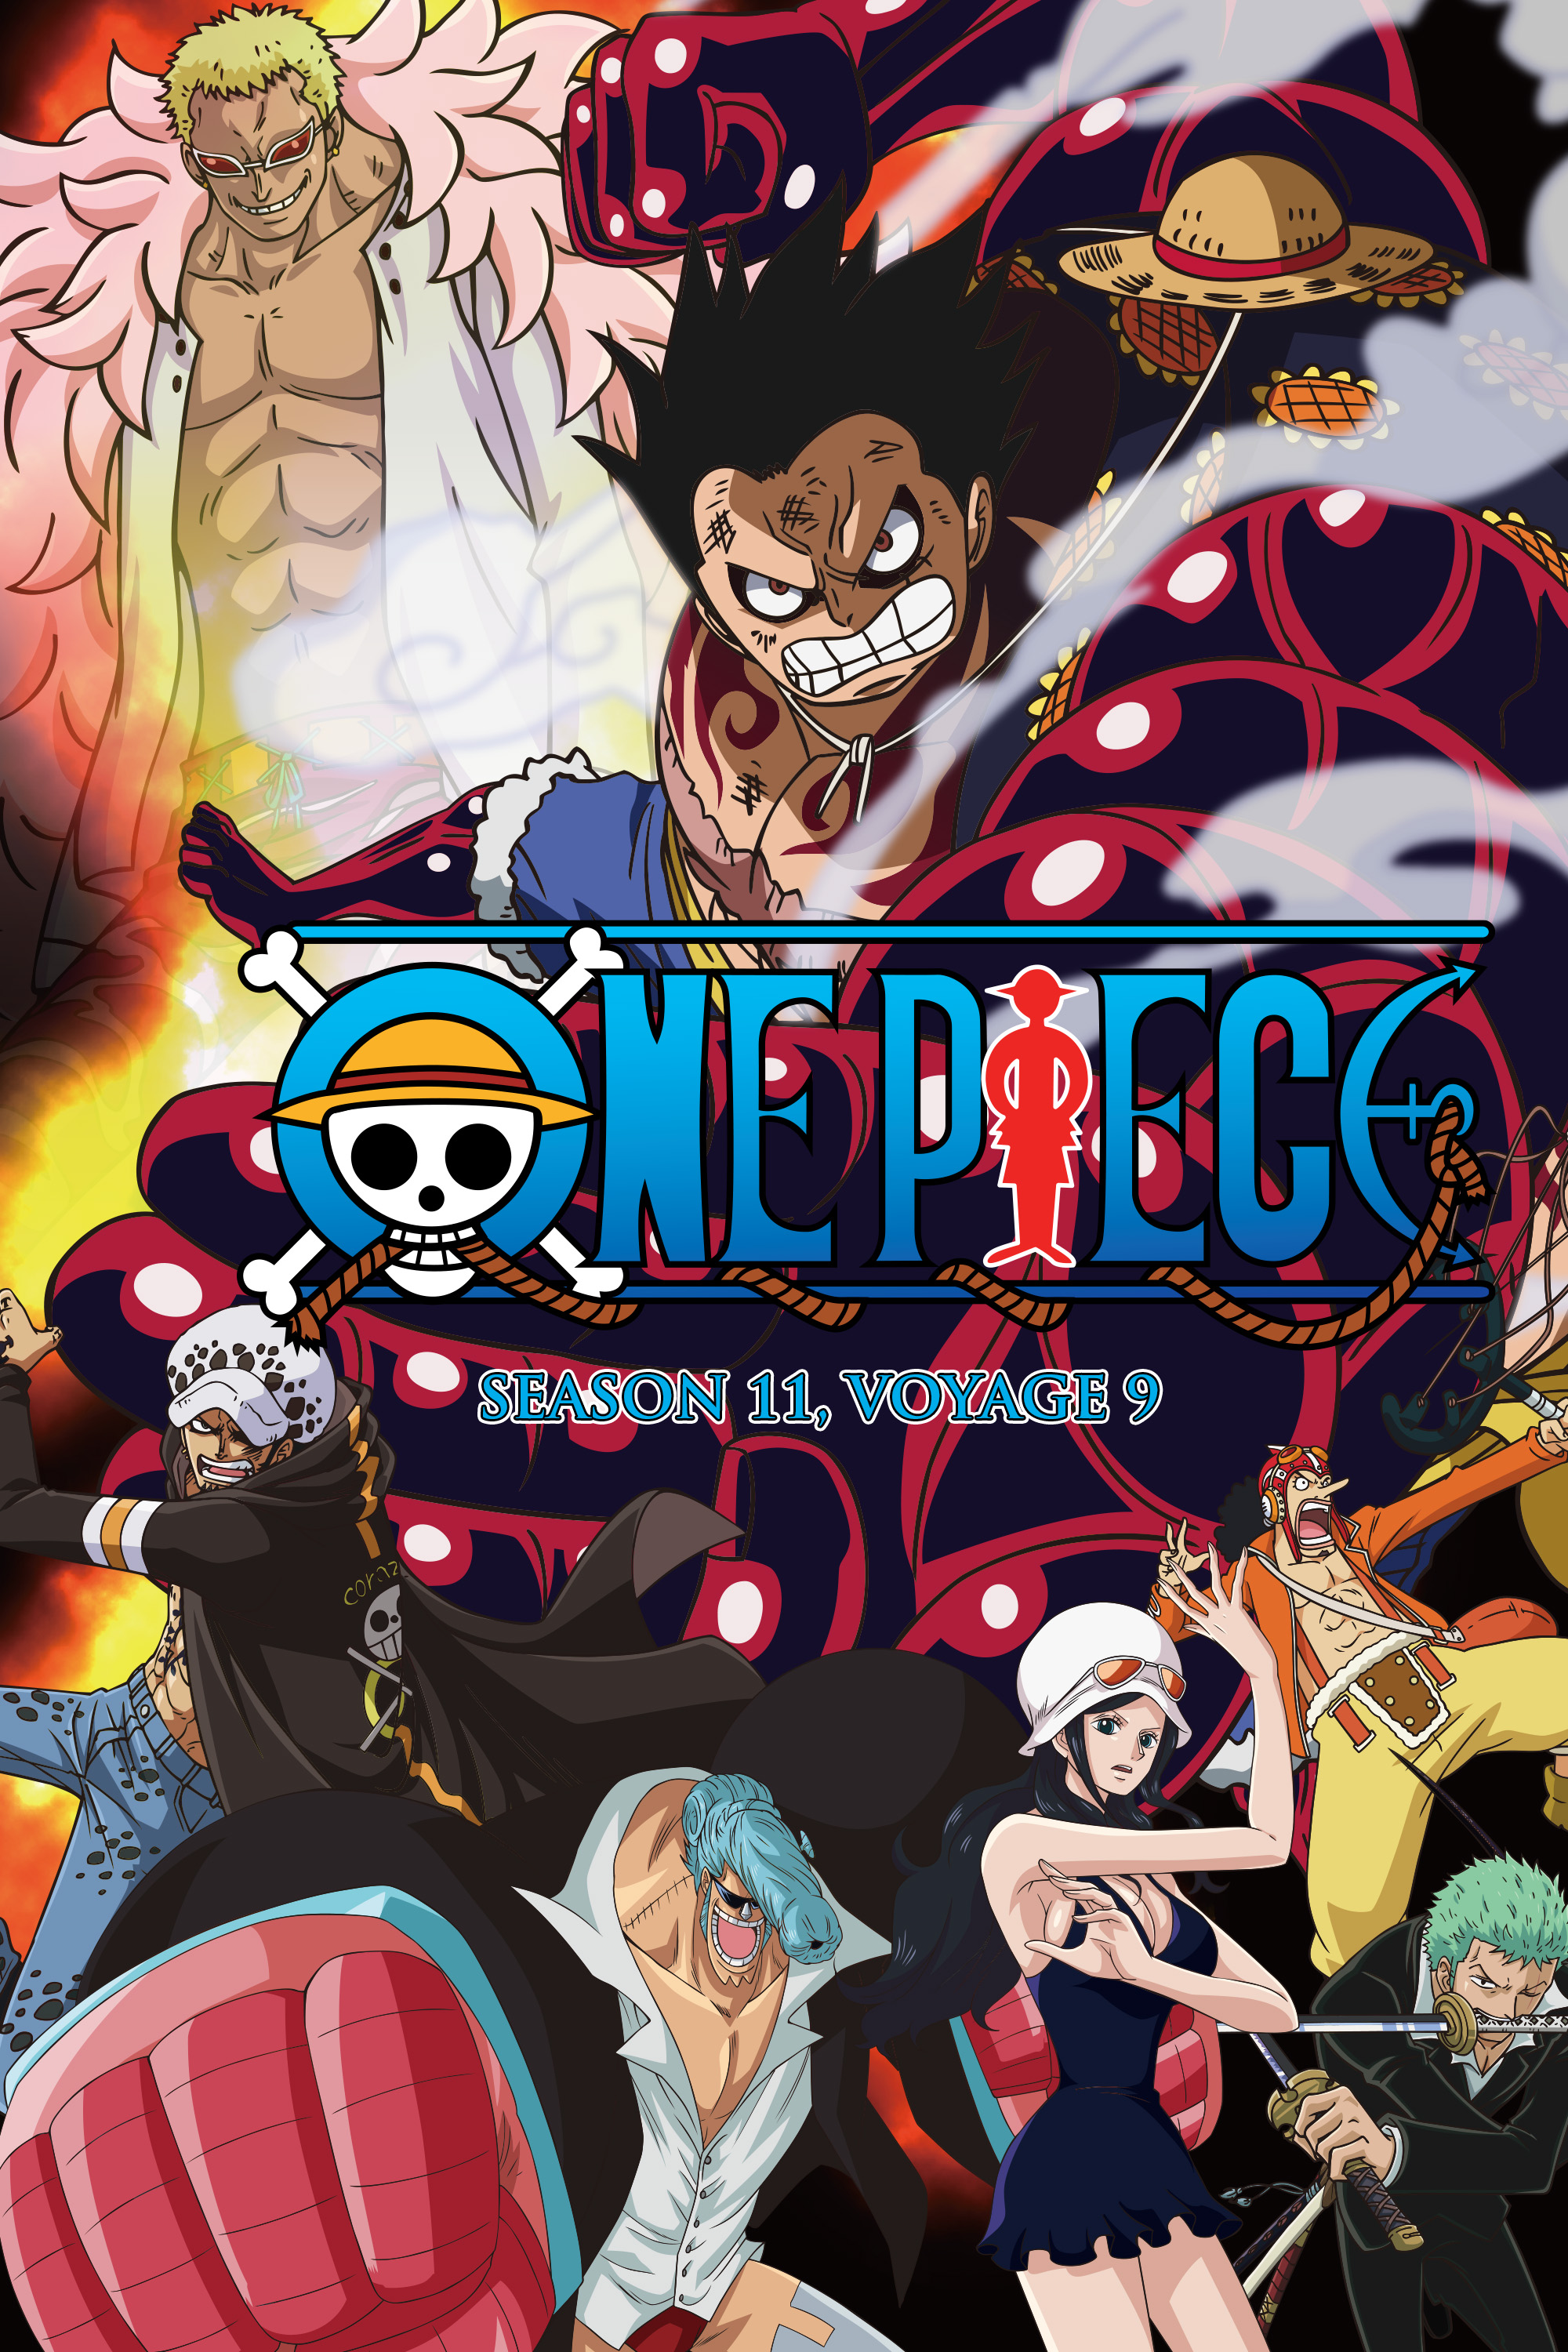 Funimation Luffy S Epic Fight With Doflamingo Reaches Its Conclusion What Happens When Former Enemies Turn Into Loyal Friends One Piece Season 11 Voyage 9 English Dub Eps 733 746 Heads To